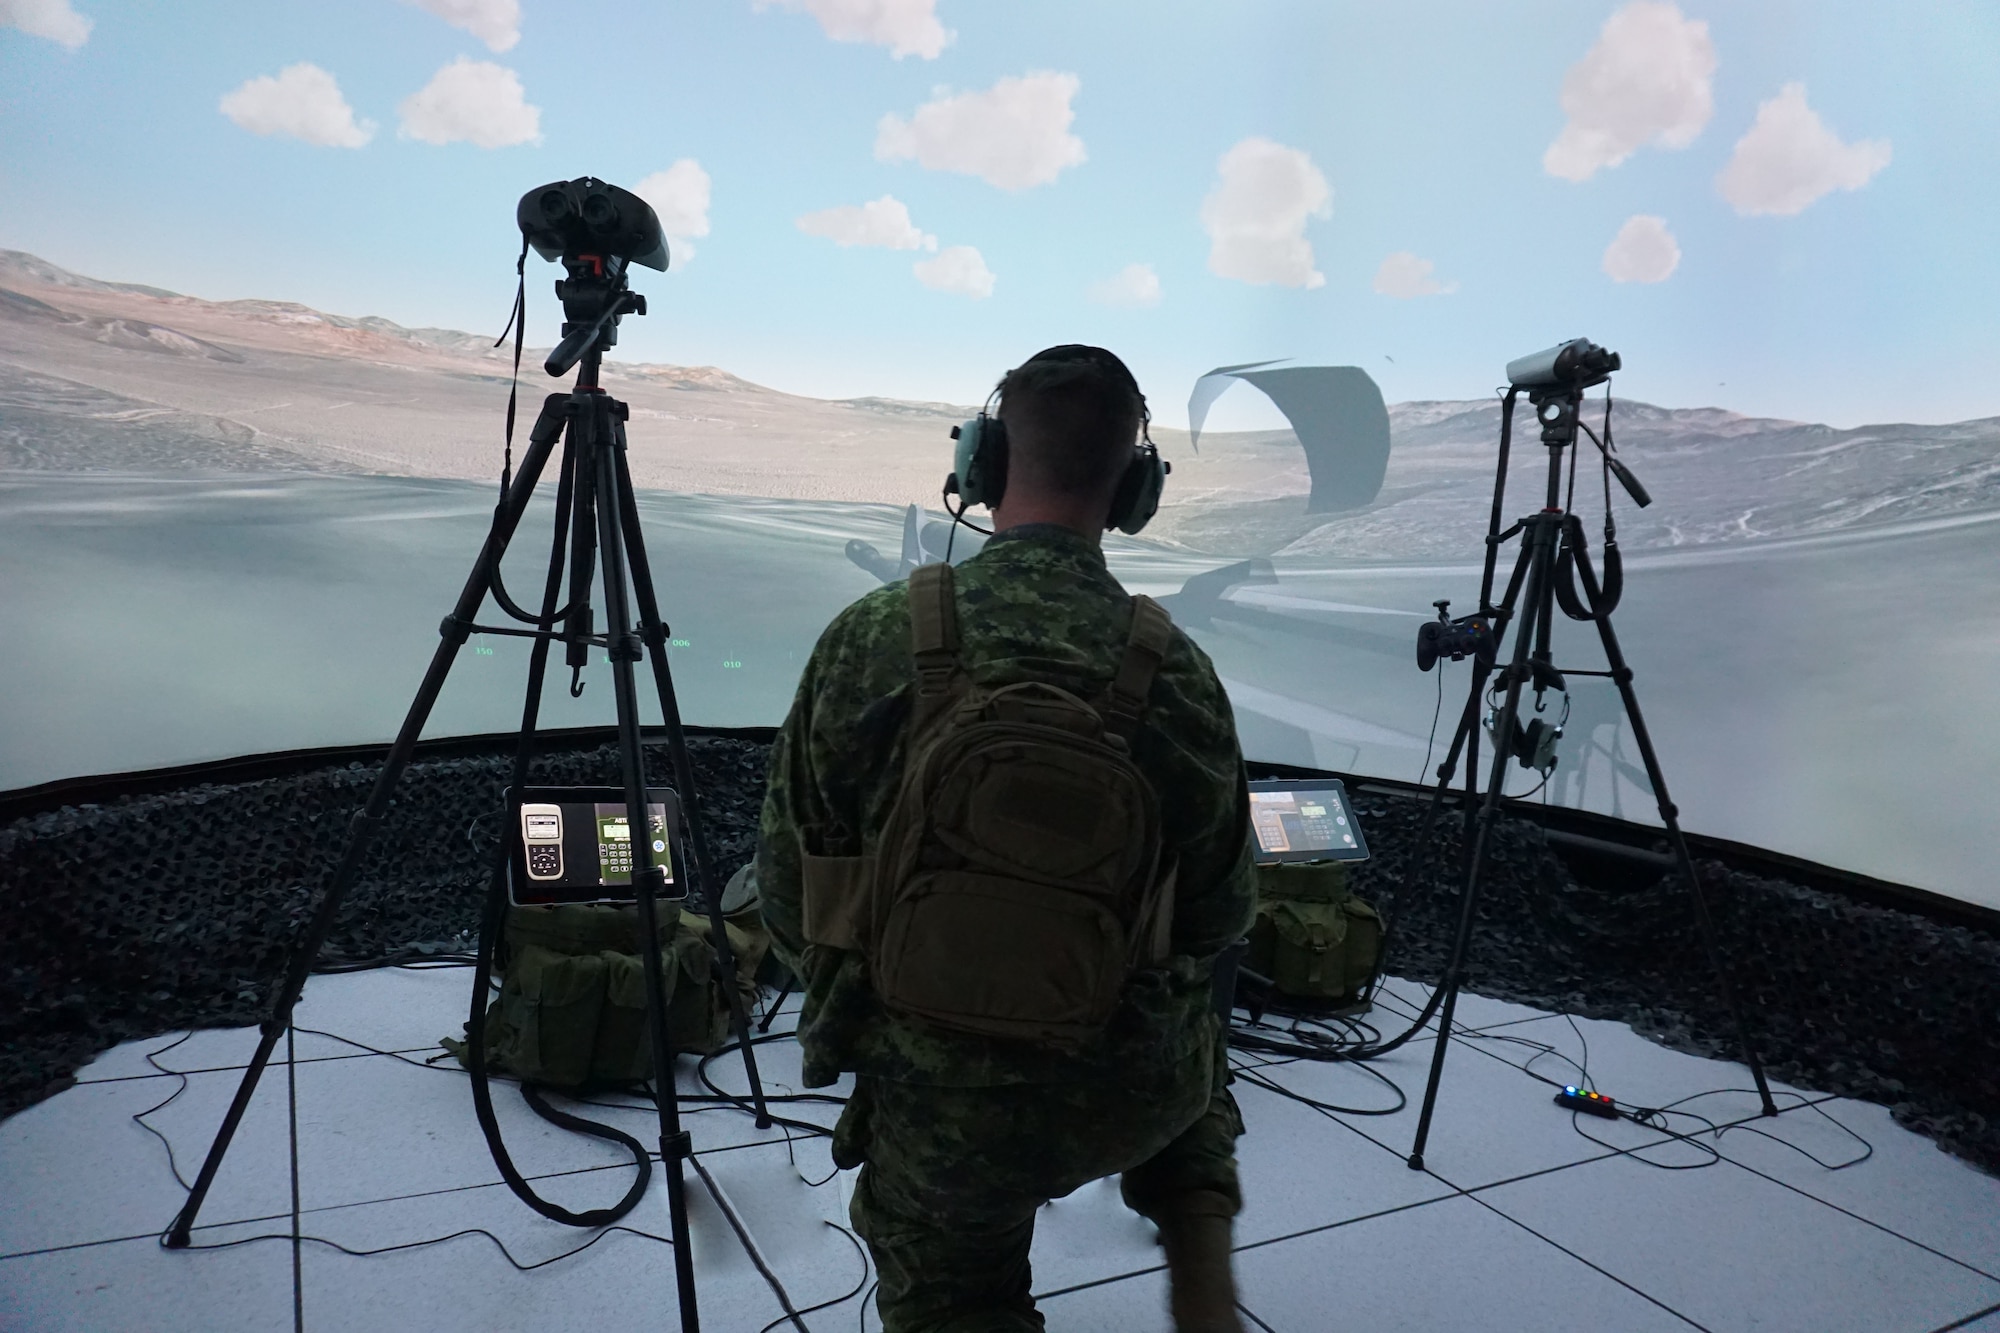 A Canadian coalition tactical air control party member operates within a simultaneously live, virtual, and constructive environment allowing warfighters to prepare to wage war, and then practice doing so in a realistic simulation so that they can learn how to be combat effective during Coalition VIRTUAL FLAG 22-1 at Kirtland Air Force Base, New Mexico, Oct. 24 - Nov. 5, 2021. CVF exercises led by the United States Air Force focus on coalition major combat operations in a realistic theater against a near-peer threat in a dynamic training environment. CVFs are designed to build and maintain joint and coalition partnerships between the United States, United Kingdom, Australia, and Canada by focusing on planning, executing, and debriefing a multitude of mission sets in air, space, surface, and cyber domains. (This photo has been altered for security purposes by removing monitor screens and paperwork on the floor.) (U.S. Air Force photo by Deb Henley)